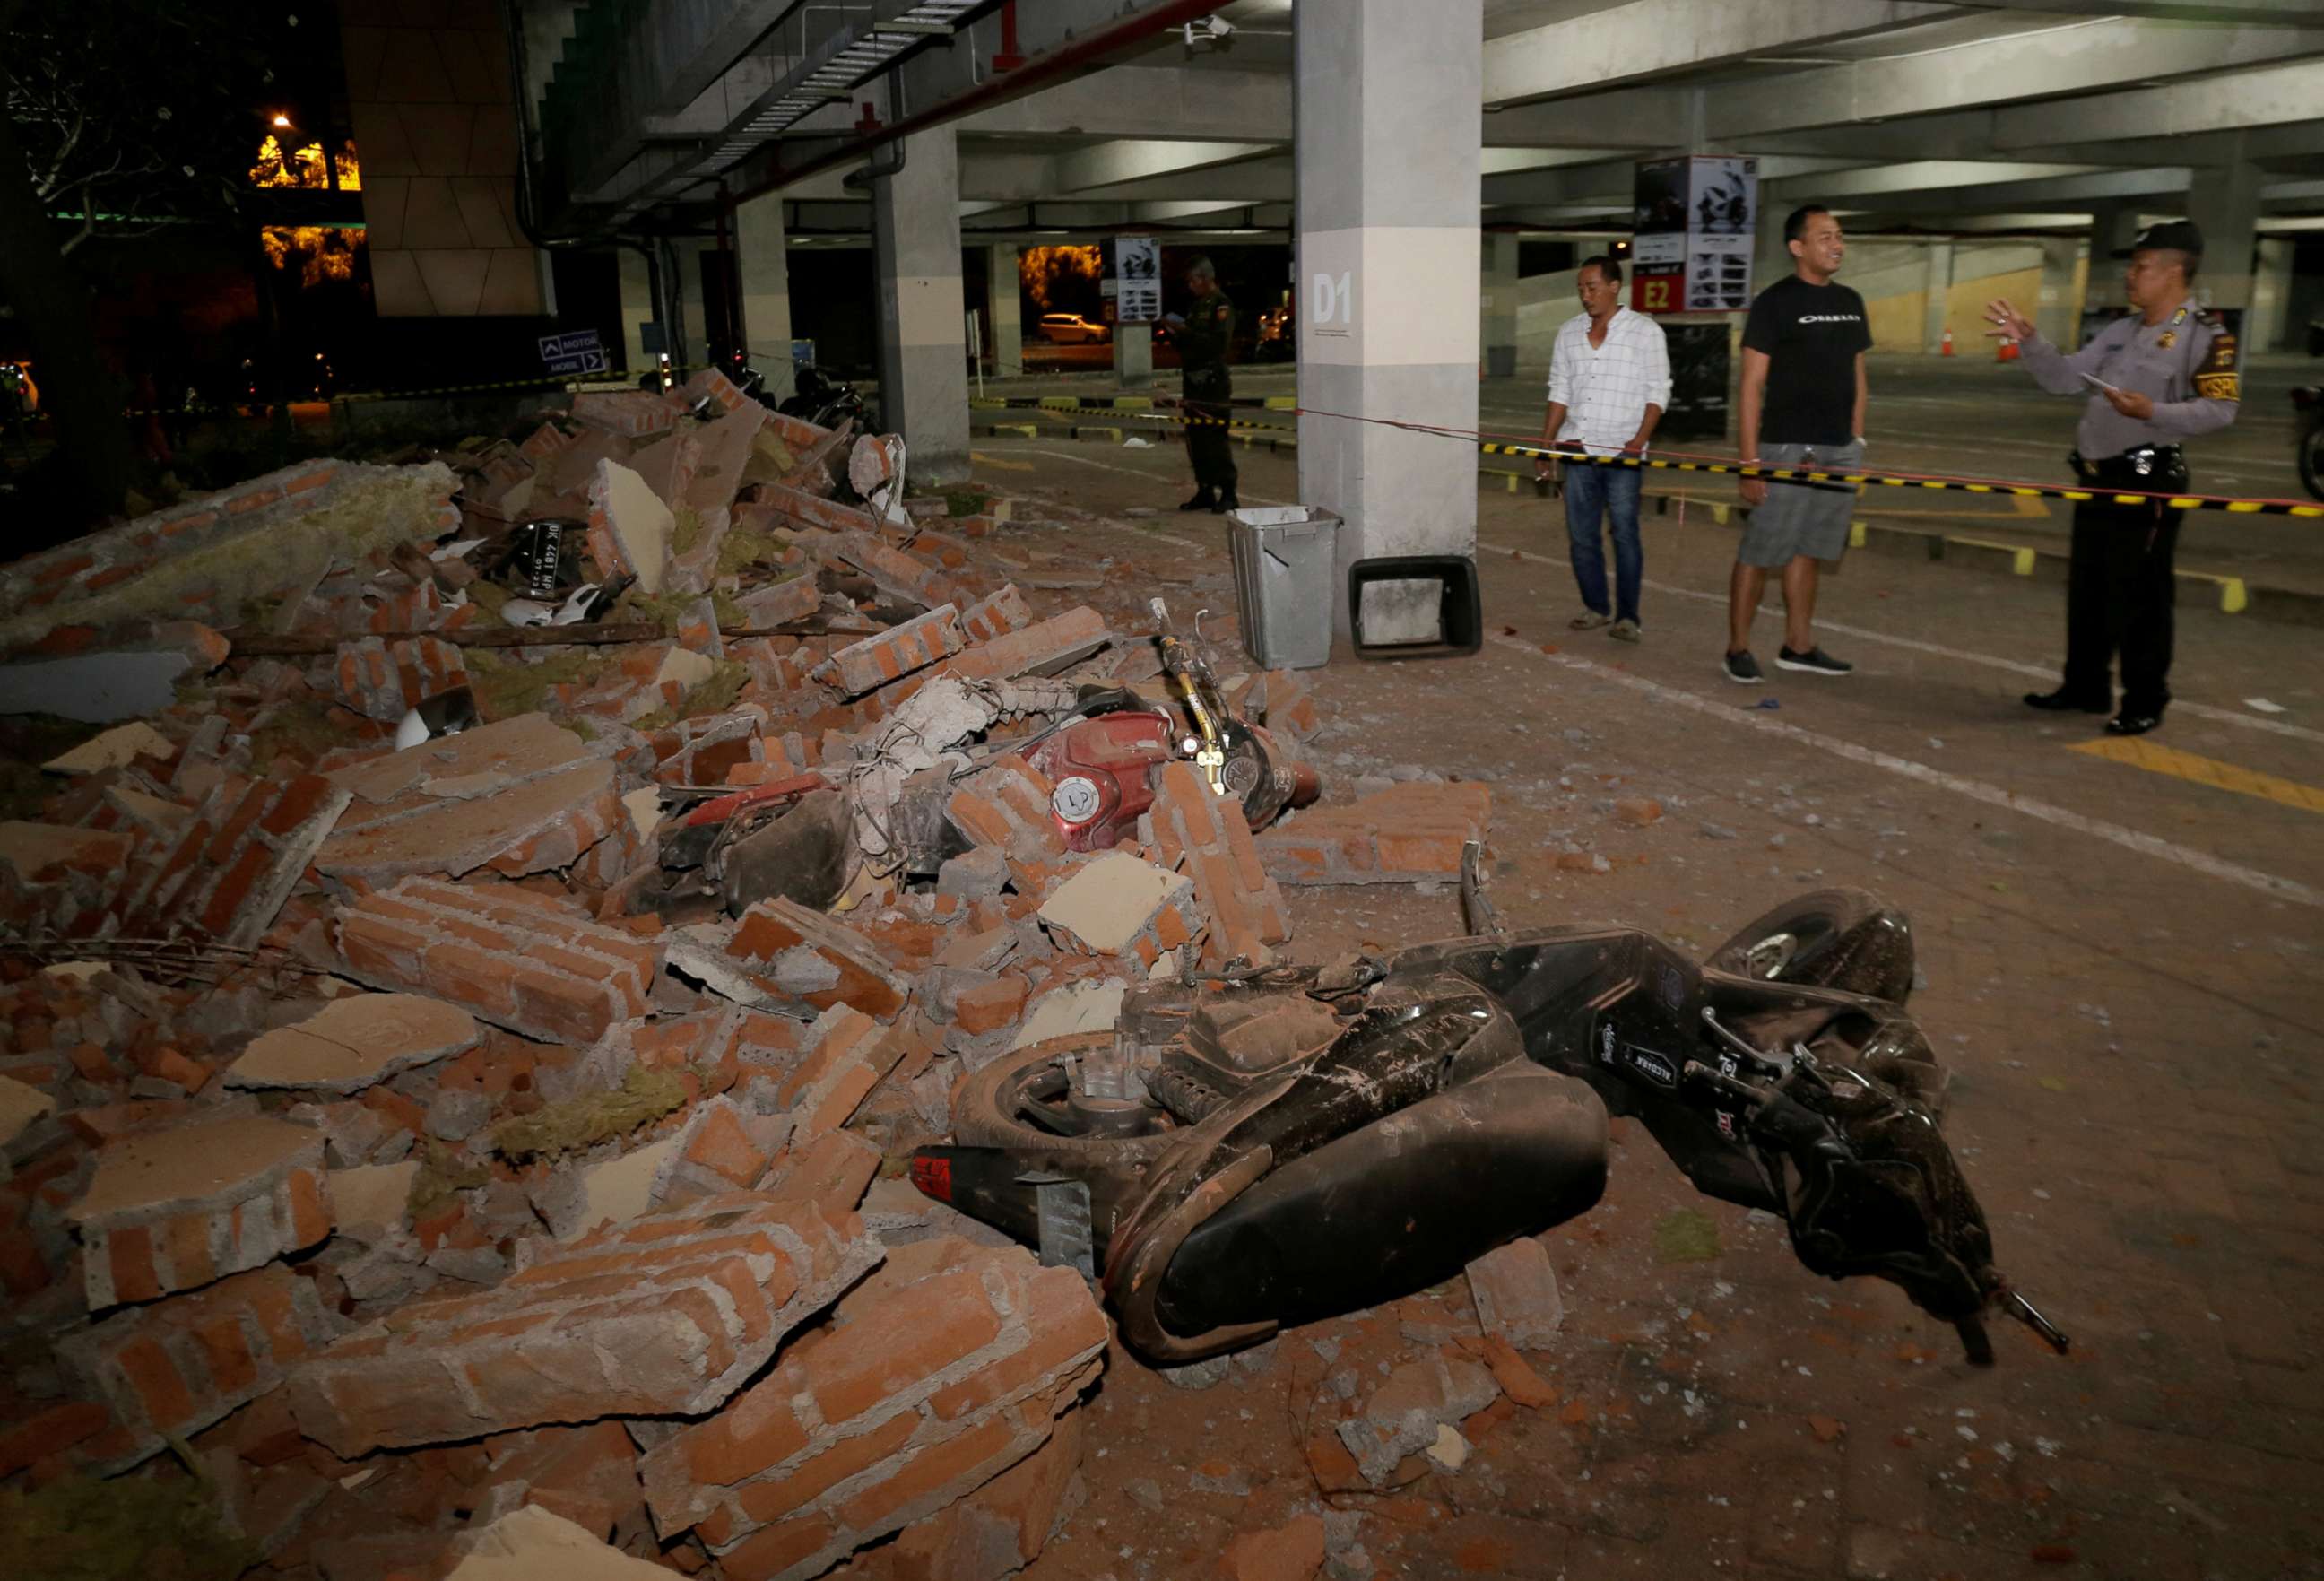 PHOTO: A policeman examines debris that fell and crushed parked motorbikes following a strong earthquake on nearby Lombok island, at a shopping center in Kuta, Bali, Indonesia, Aug. 5, 2018.